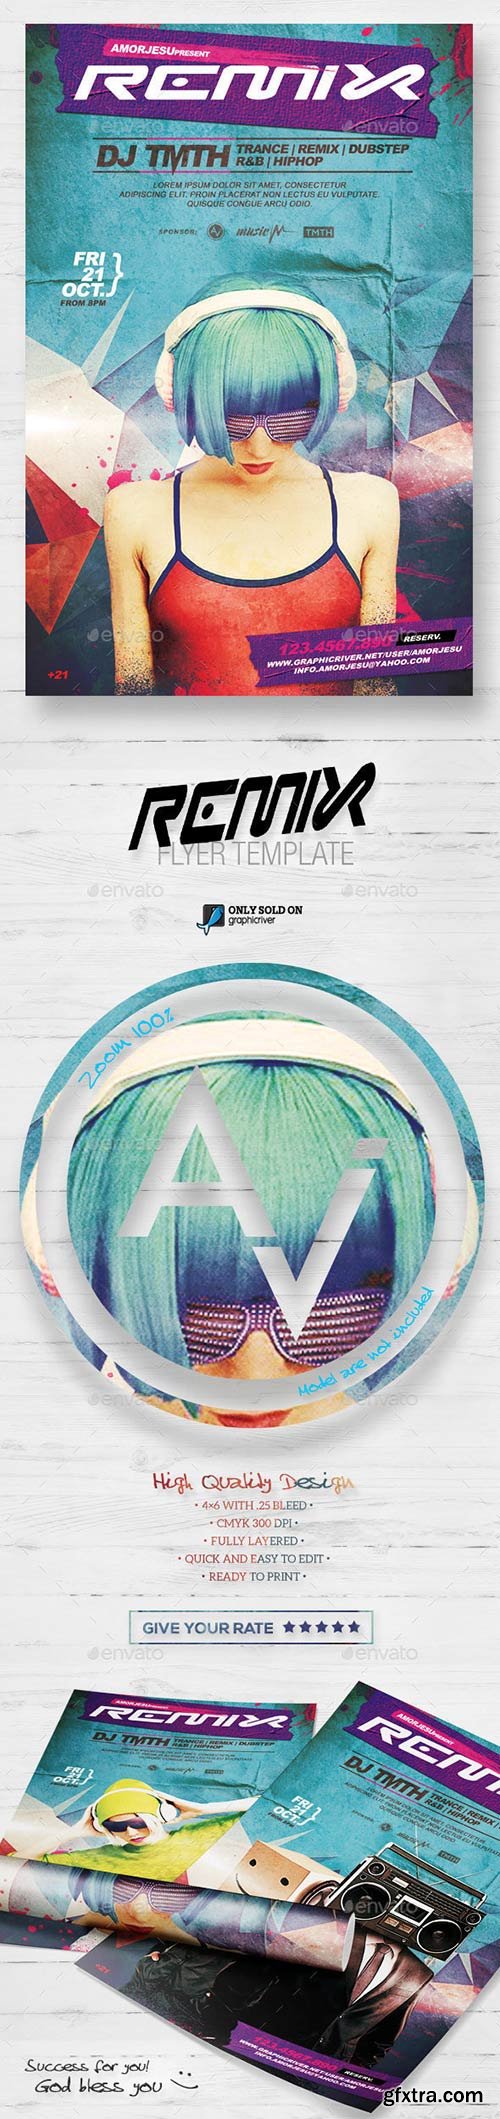 Graphicriver - Remix Flyer Template 12277790